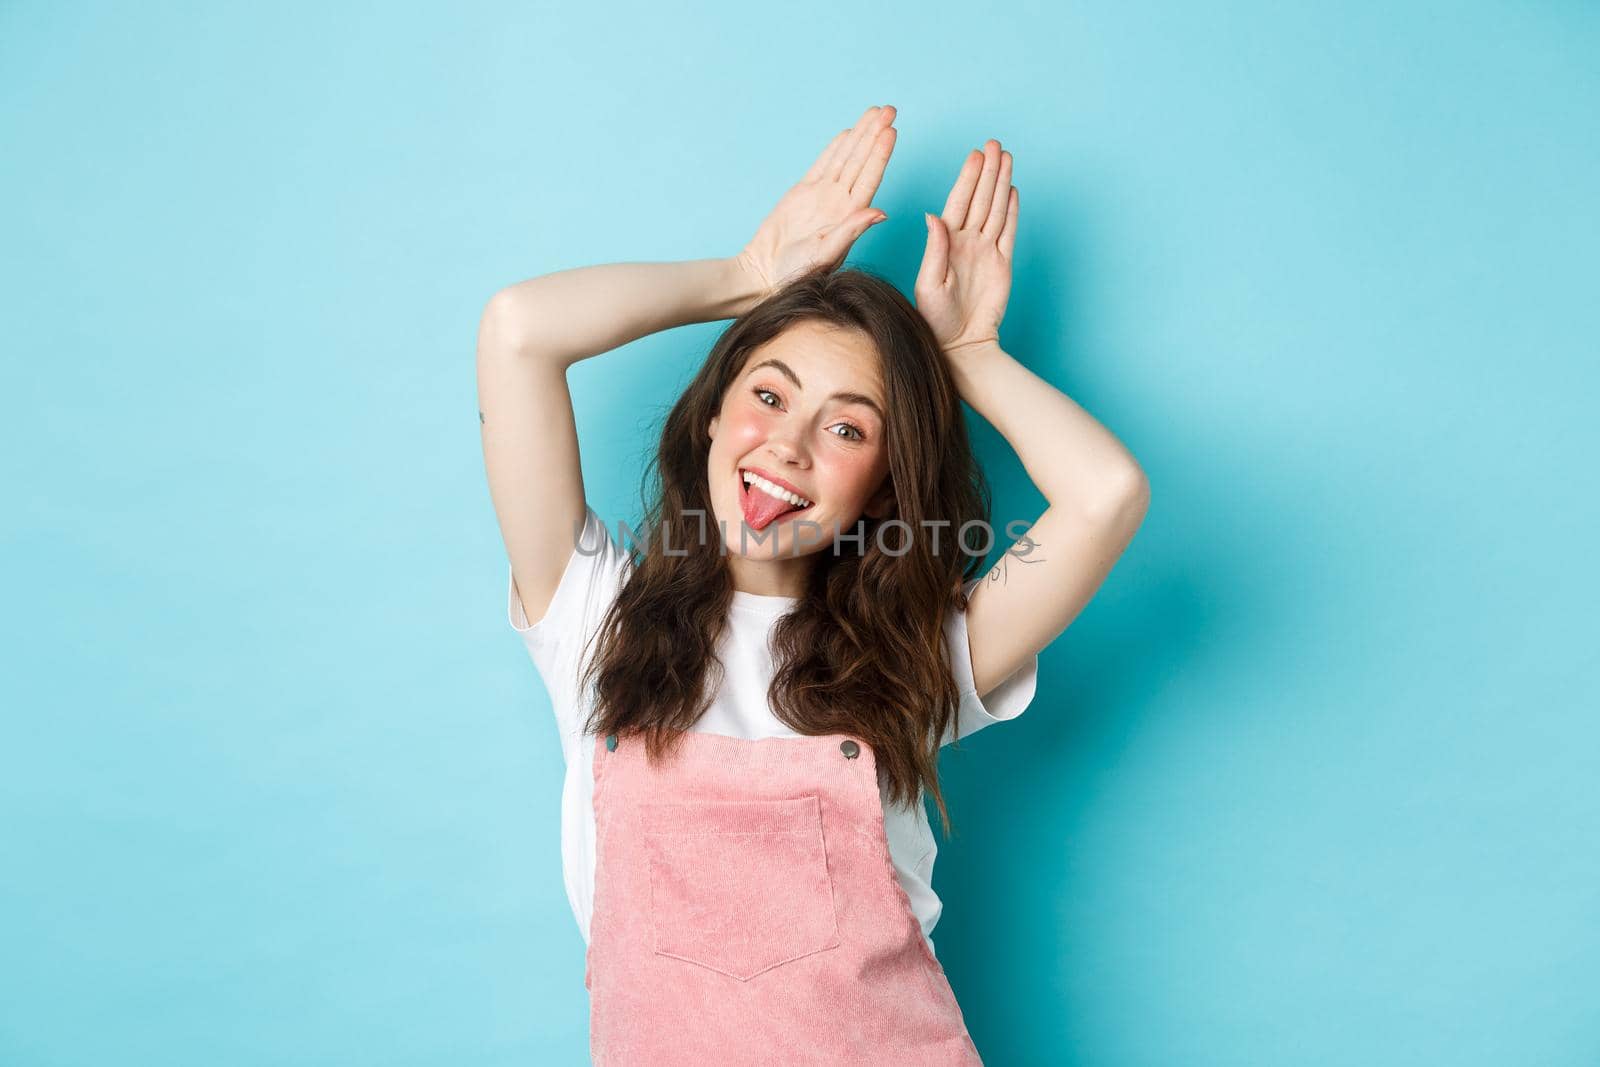 Portrait of beautiful glamour girl celebrating Easter, showing bunny rabbit ears with hands above head, smiling joyful, standing over blue background.